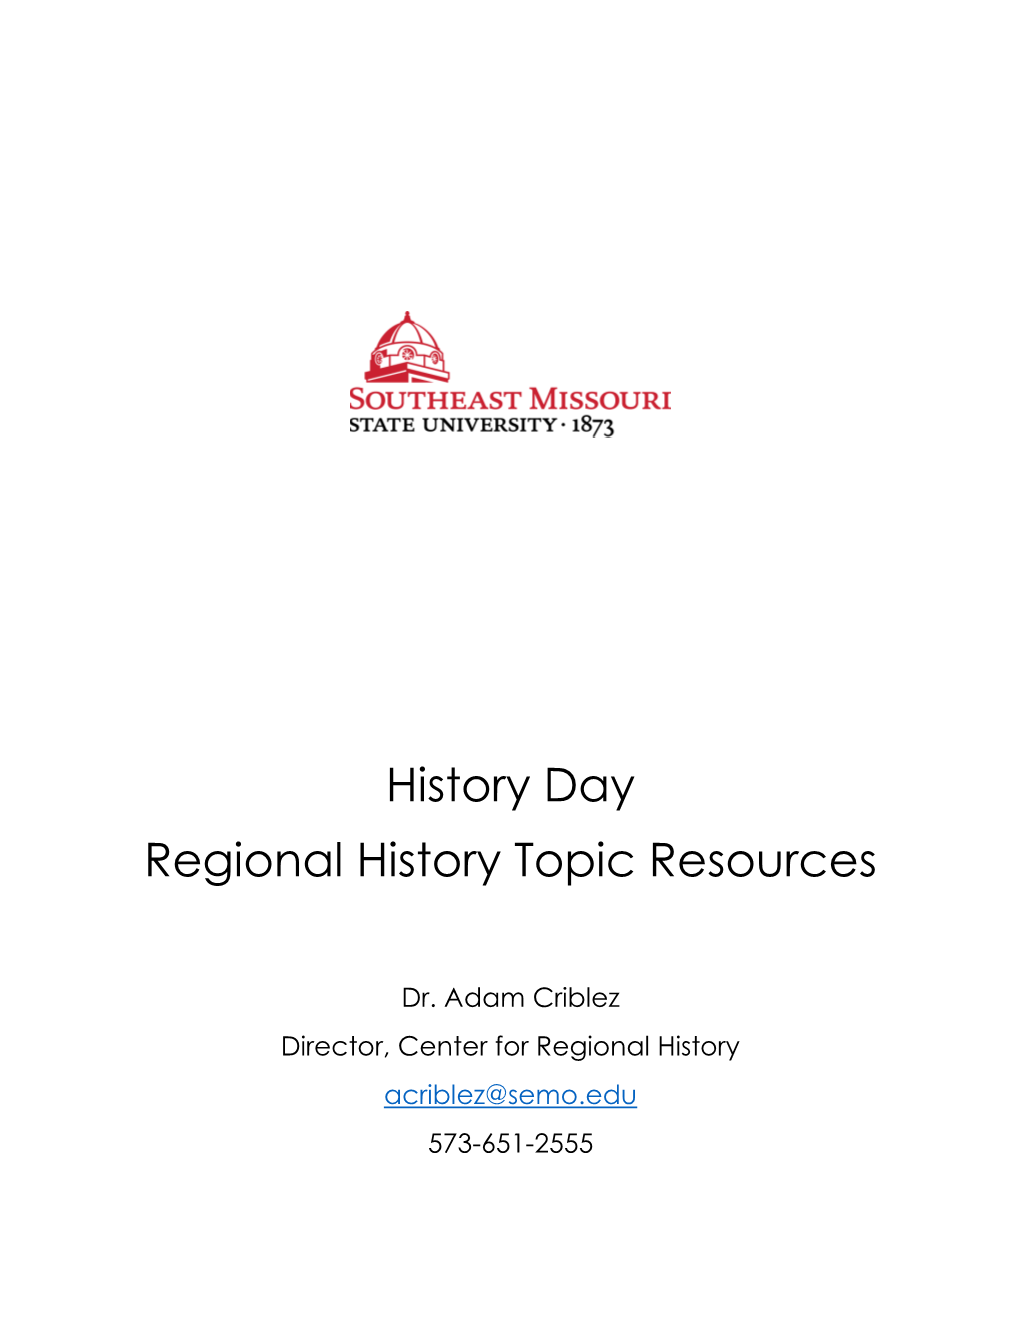 History Day Regional History Topic Resources